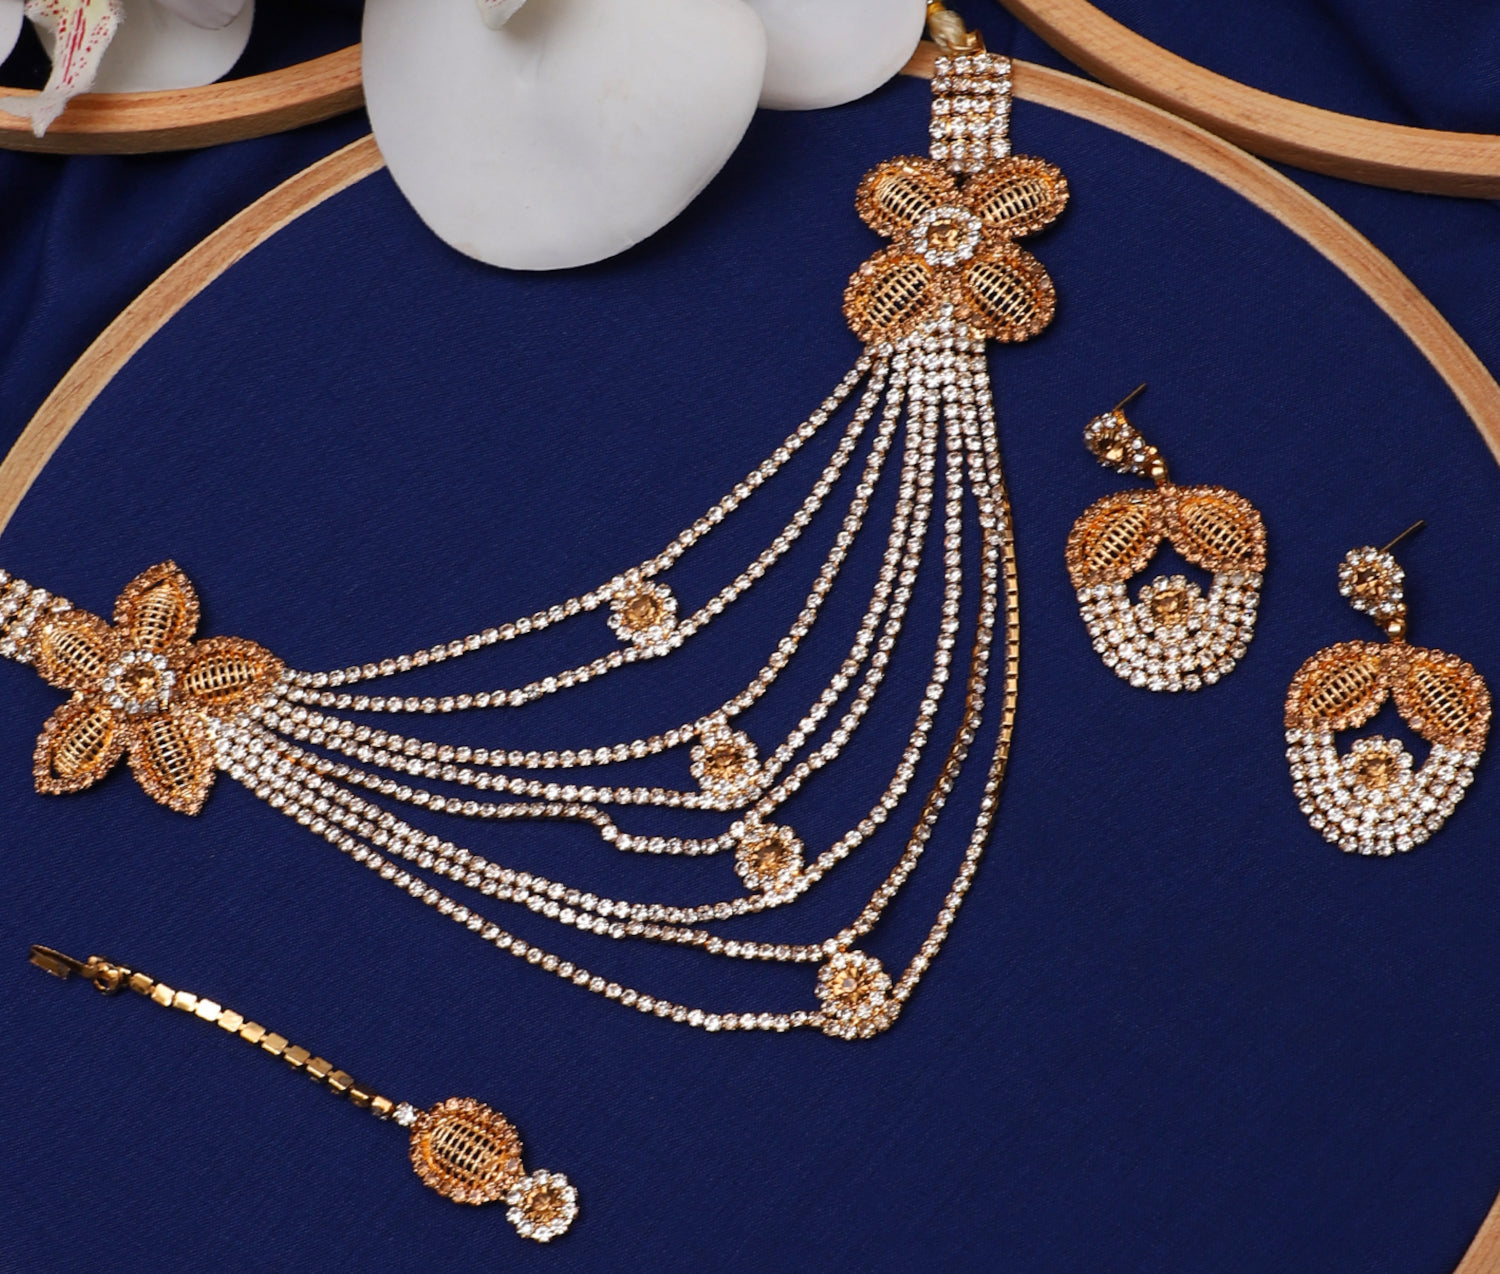  Gold Plated Necklace with Earrings and Maang-Tika | Buy This Jewellery Online from Mekkna